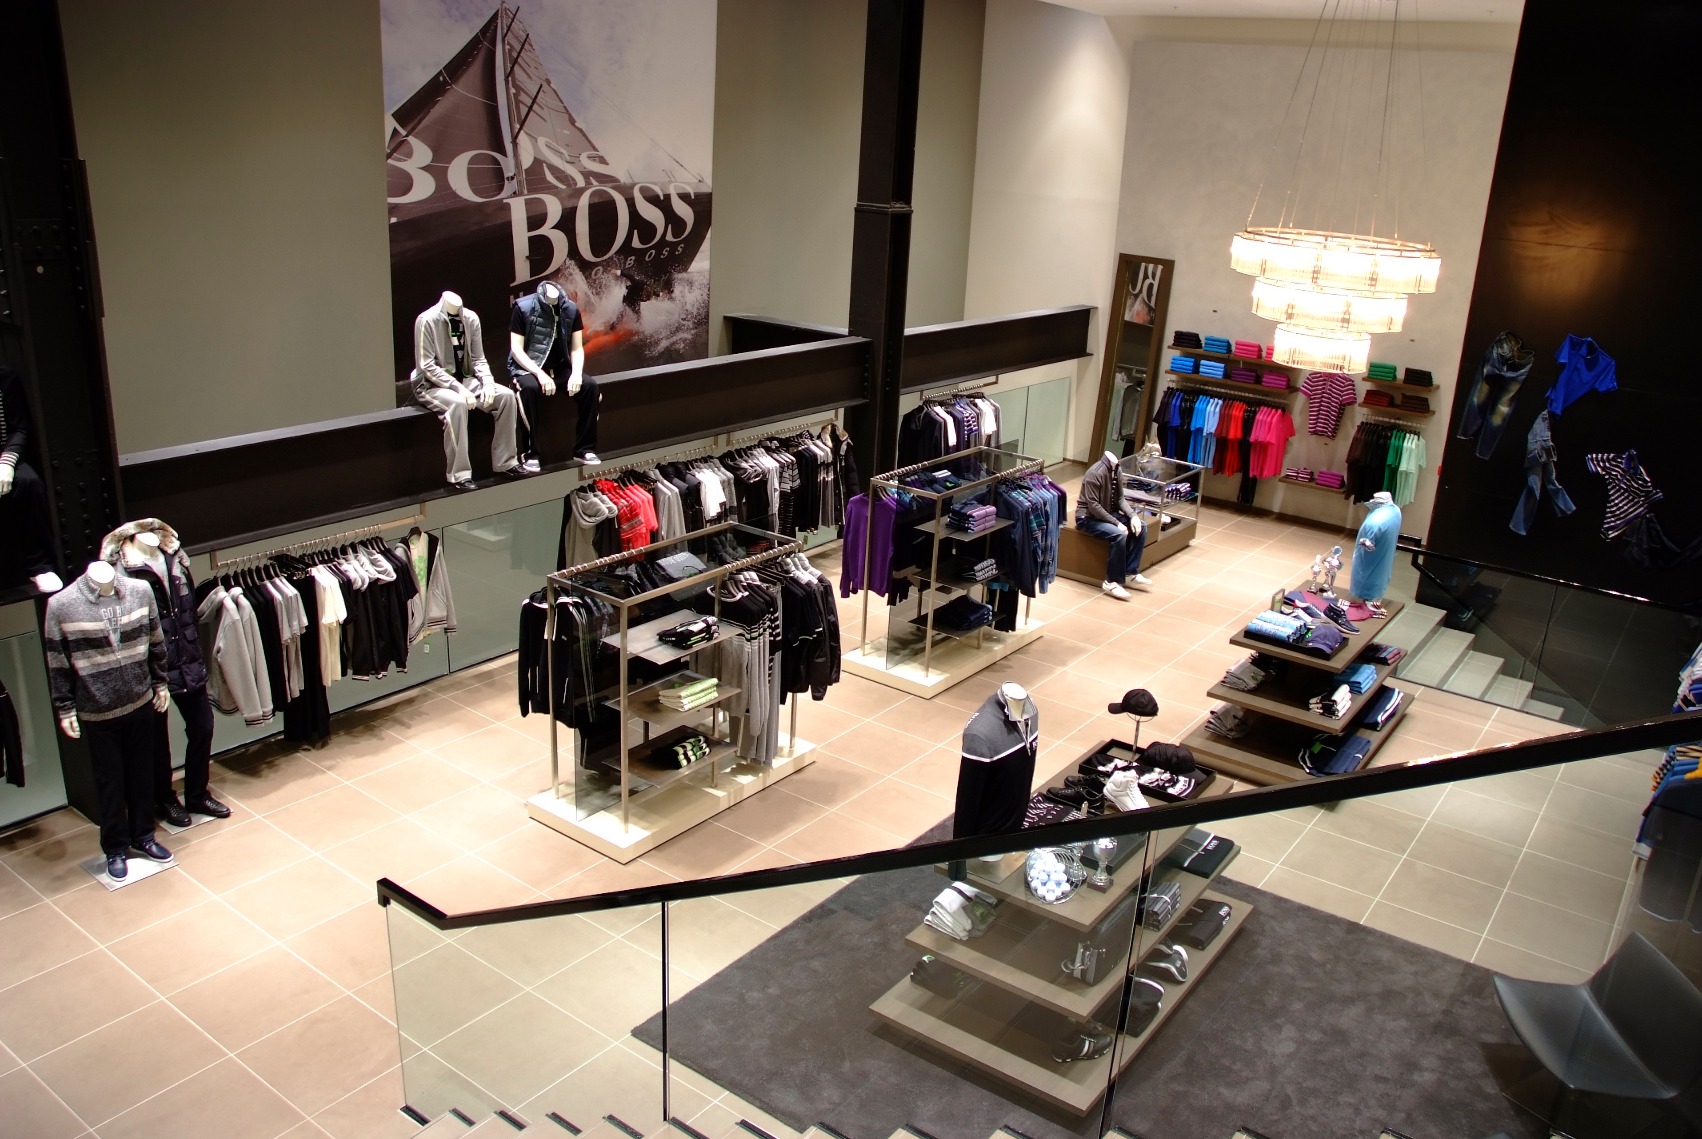 shop floor of the Boss store in New Cathedral Street